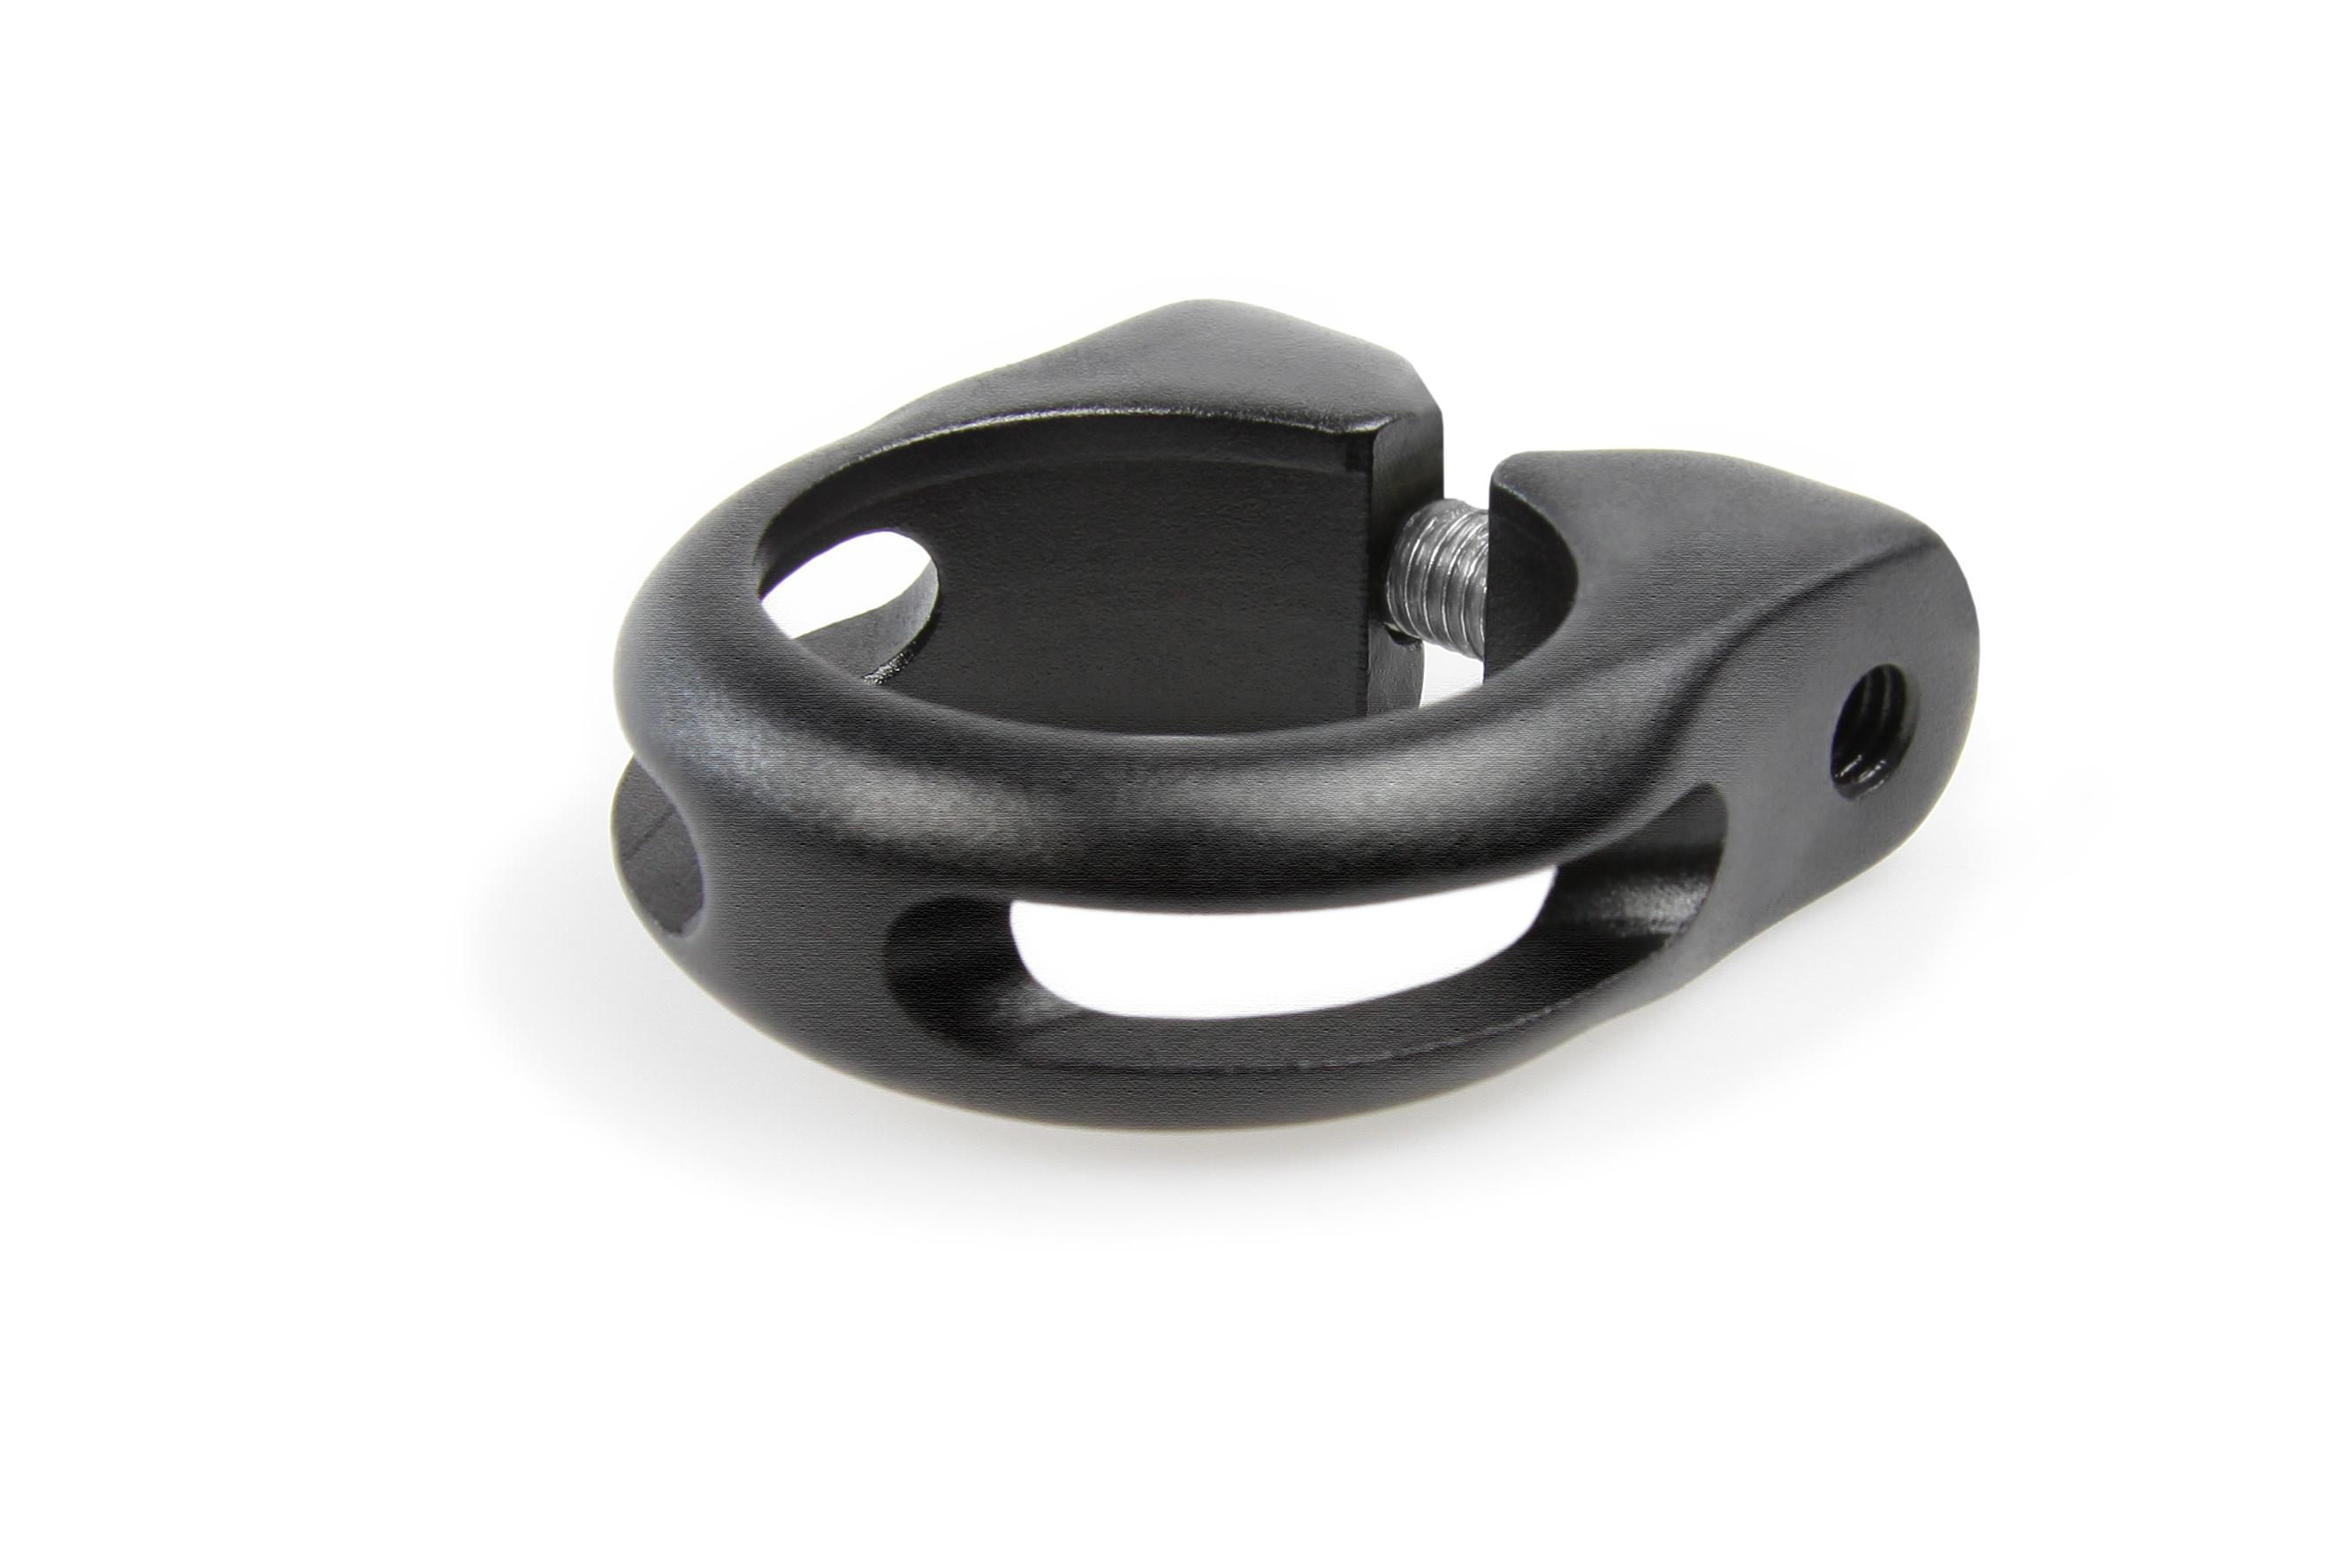 Foto Tija Red Cycling Products Comp Clamp gris/negro , 28,6 mm